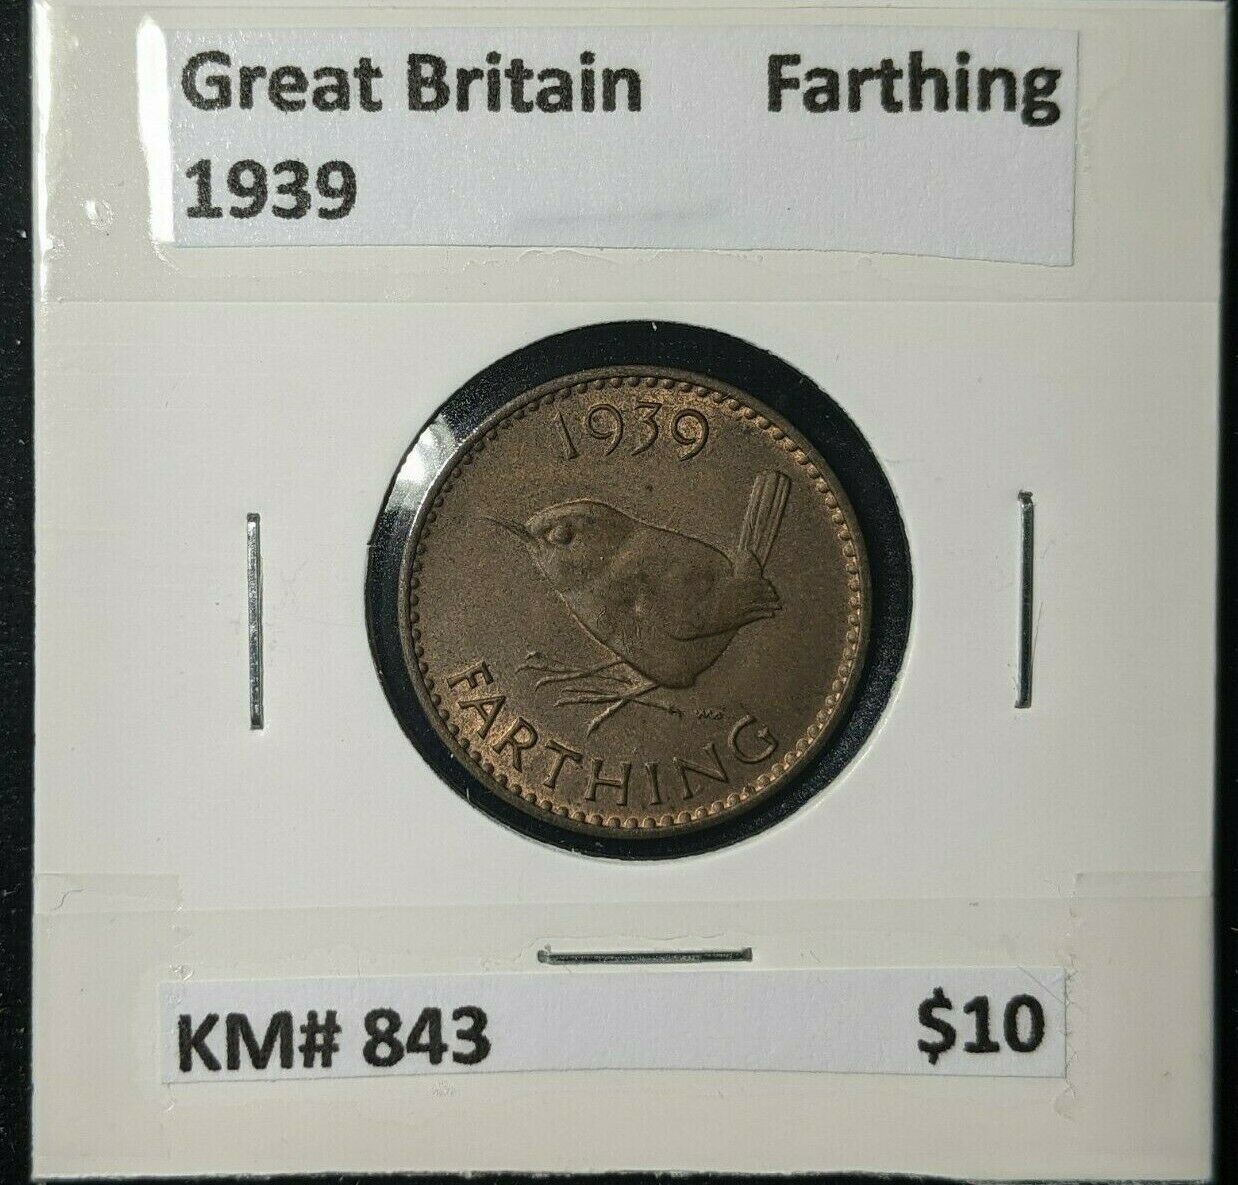 Great Britain 1939 1/4d Farthing KM# 843 #227